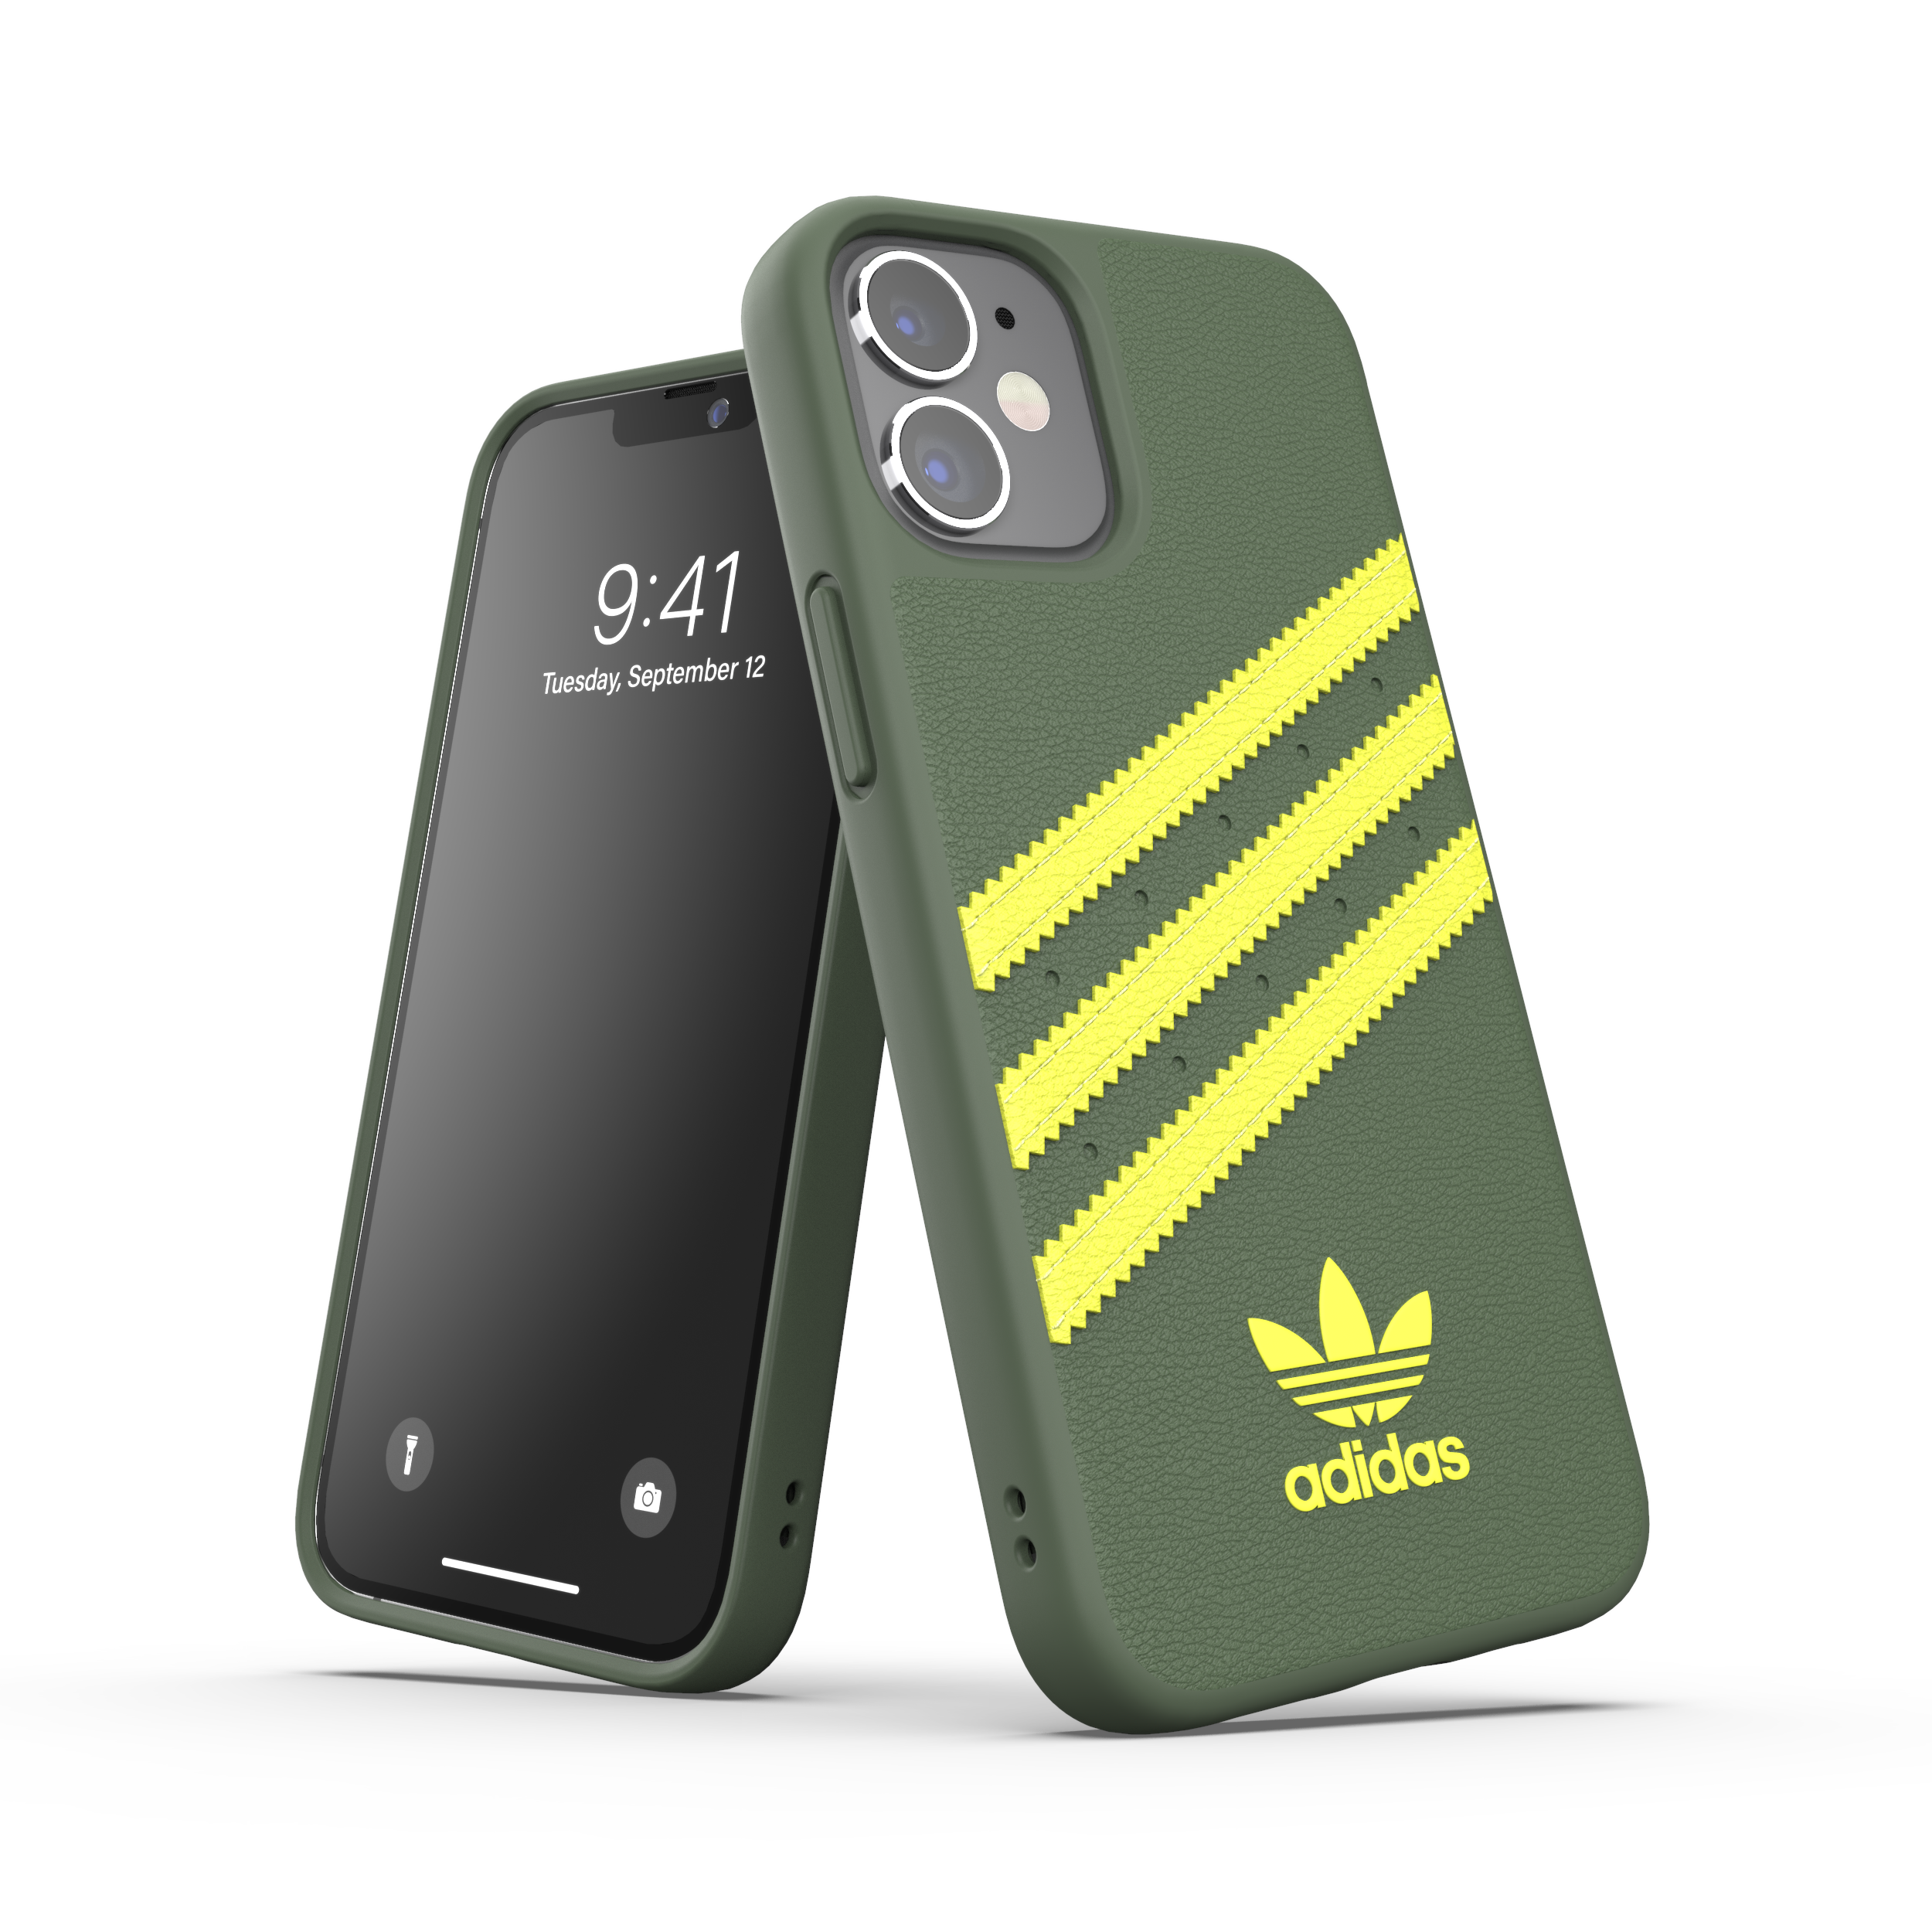 ADIDAS Moulded Case PU, GREEN APPLE, Backcover, IPHONE 12 MINI